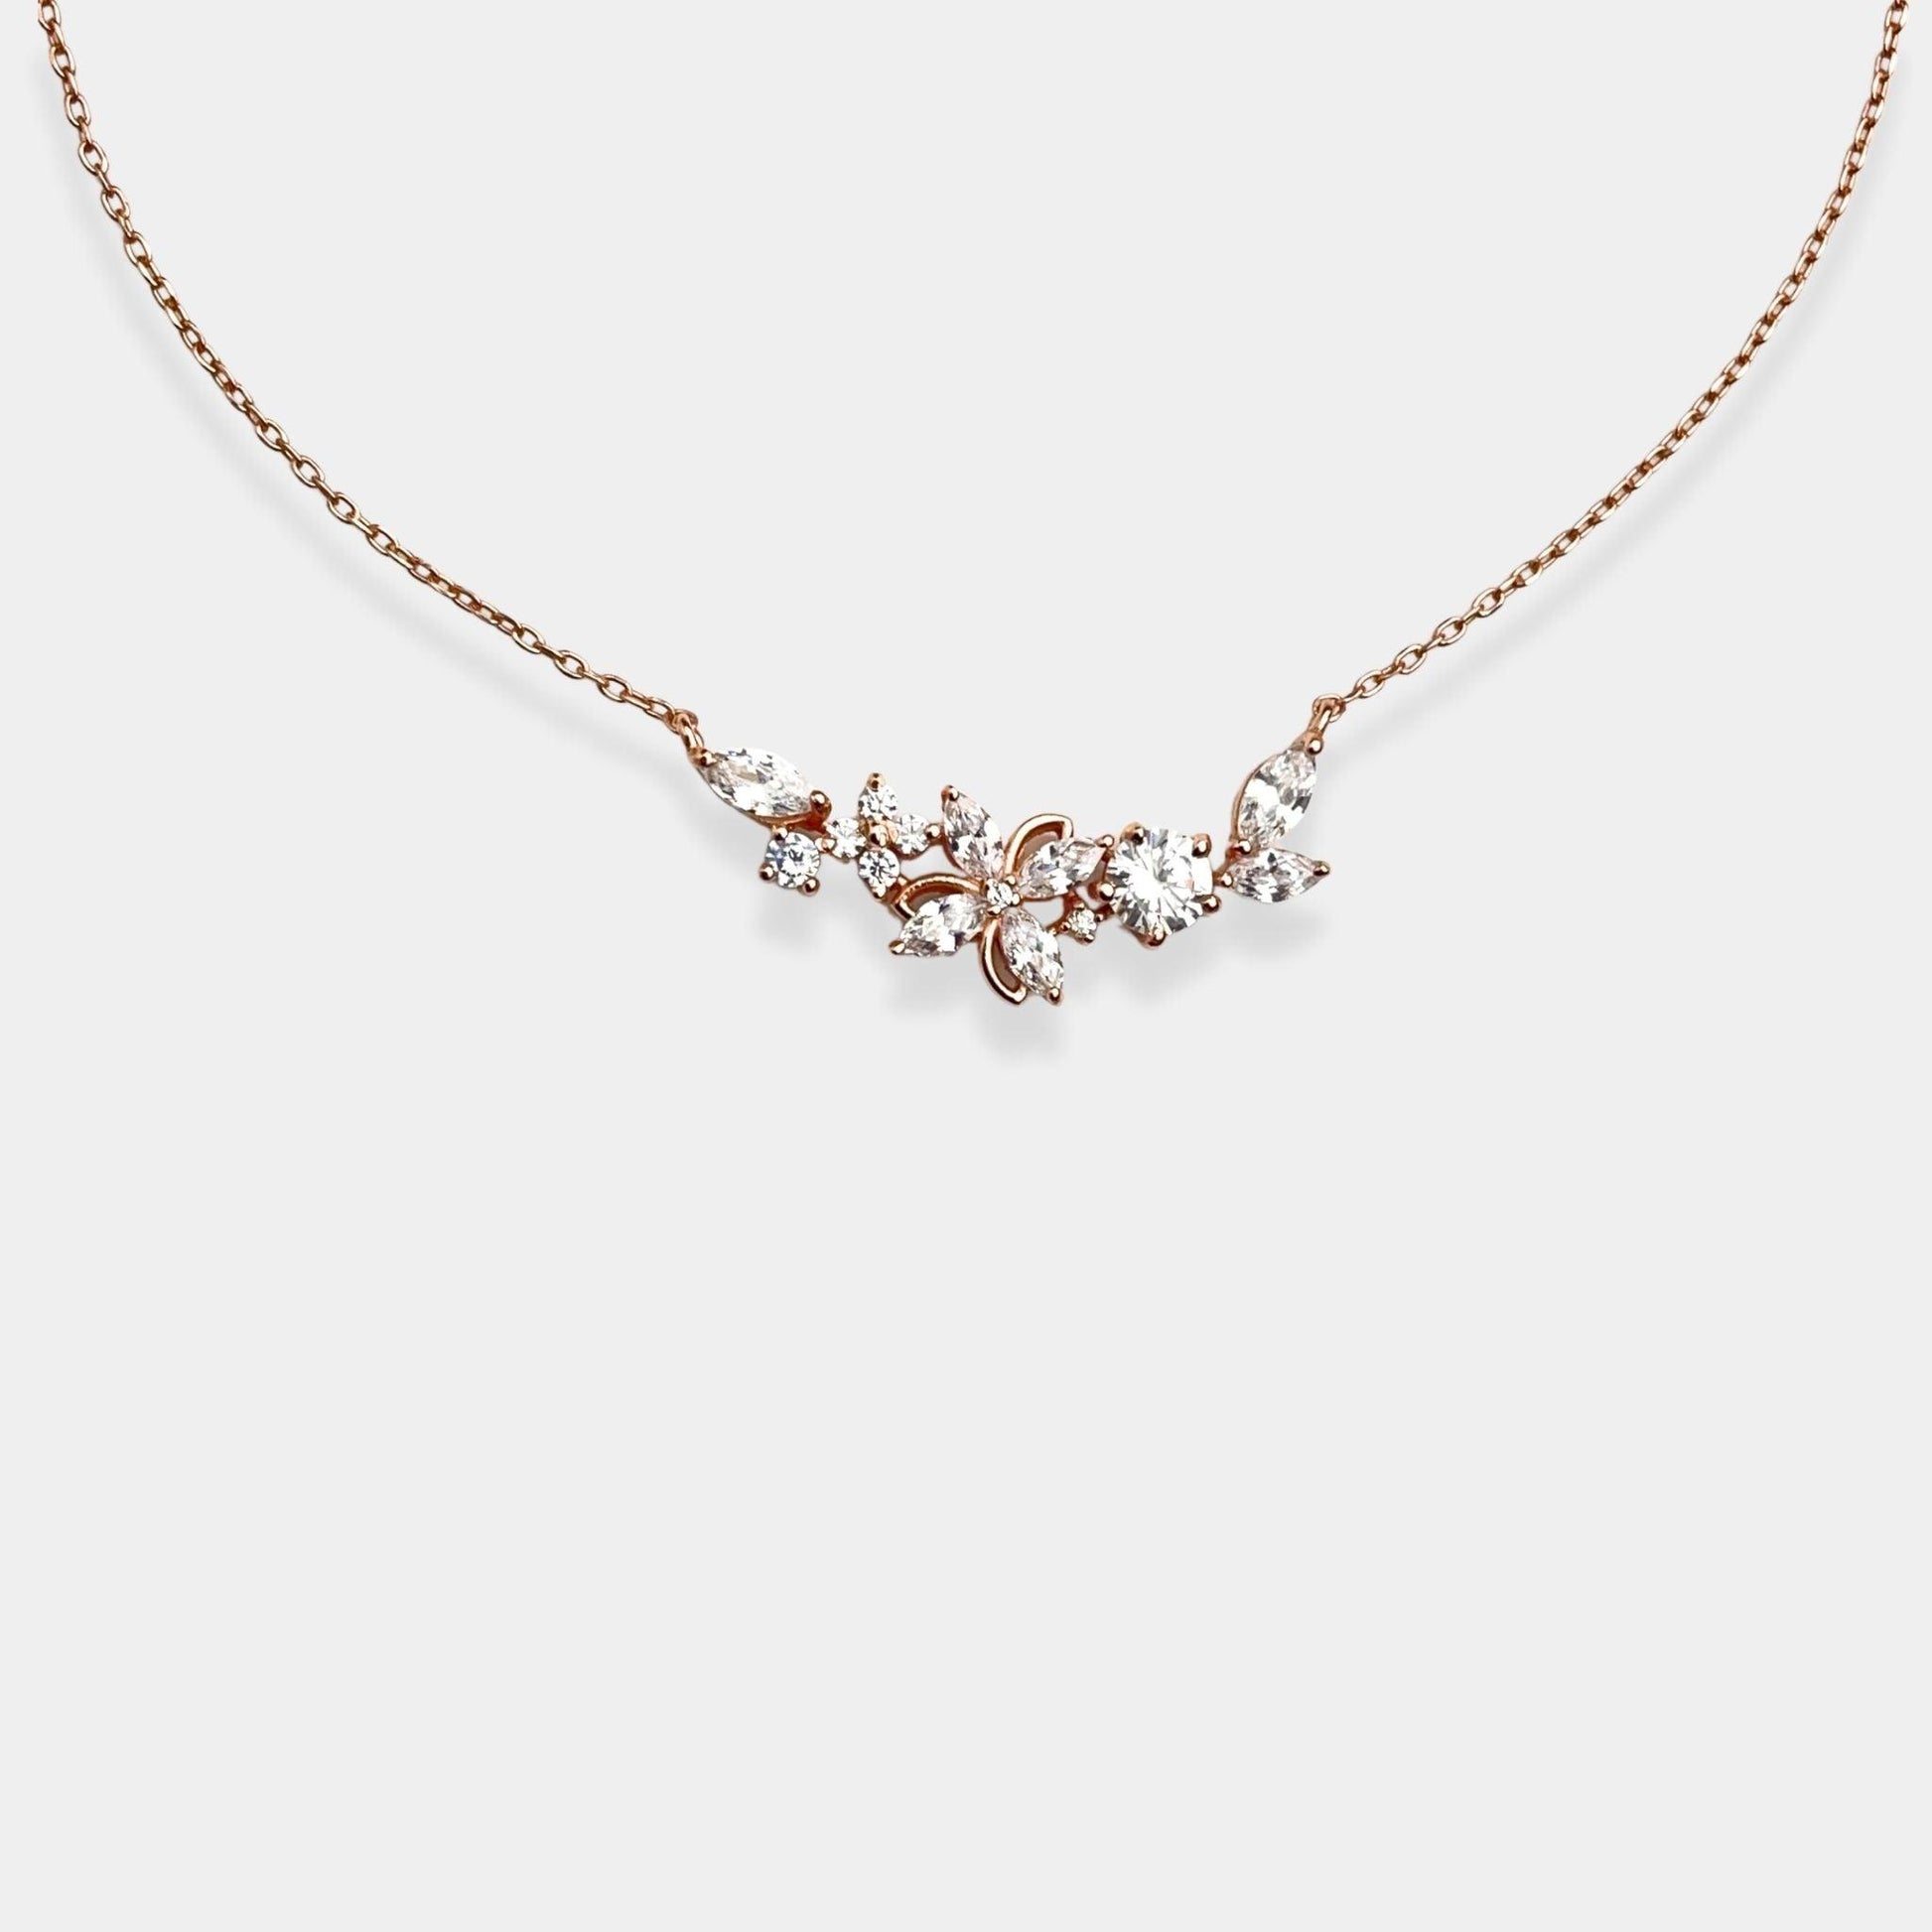 A stunning sterling silver necklace adorned with sparkling